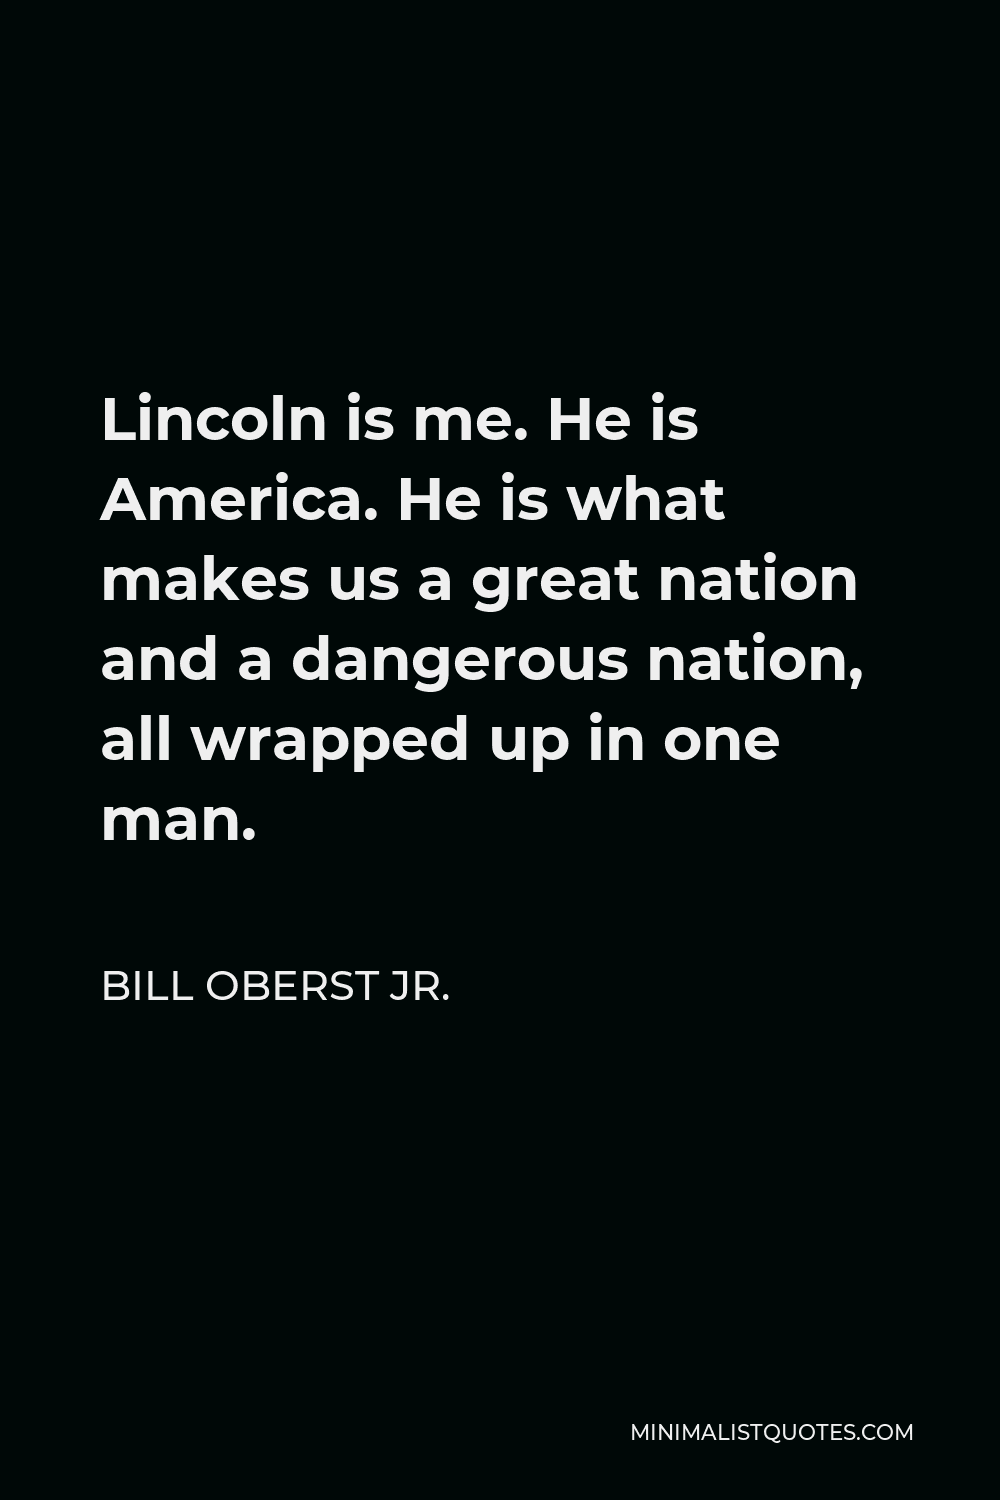 Bill Oberst Jr. Quote - Lincoln is me. He is America. He is what makes us a great nation and a dangerous nation, all wrapped up in one man.